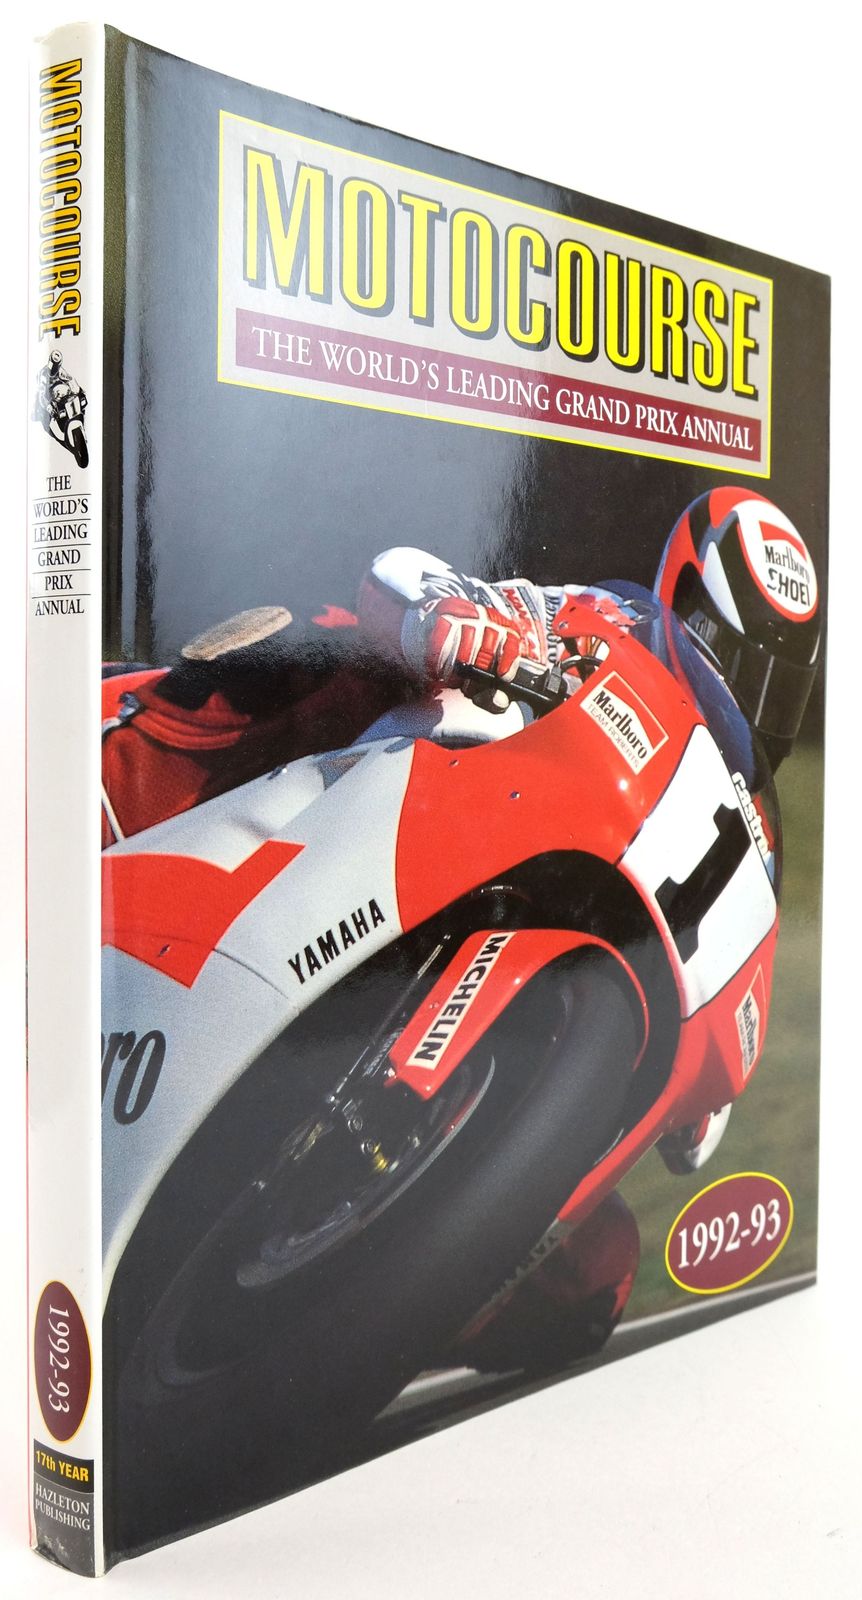 Photo of MOTOCOURSE 1992-93 published by Hazleton Publishing (STOCK CODE: 1819879)  for sale by Stella & Rose's Books